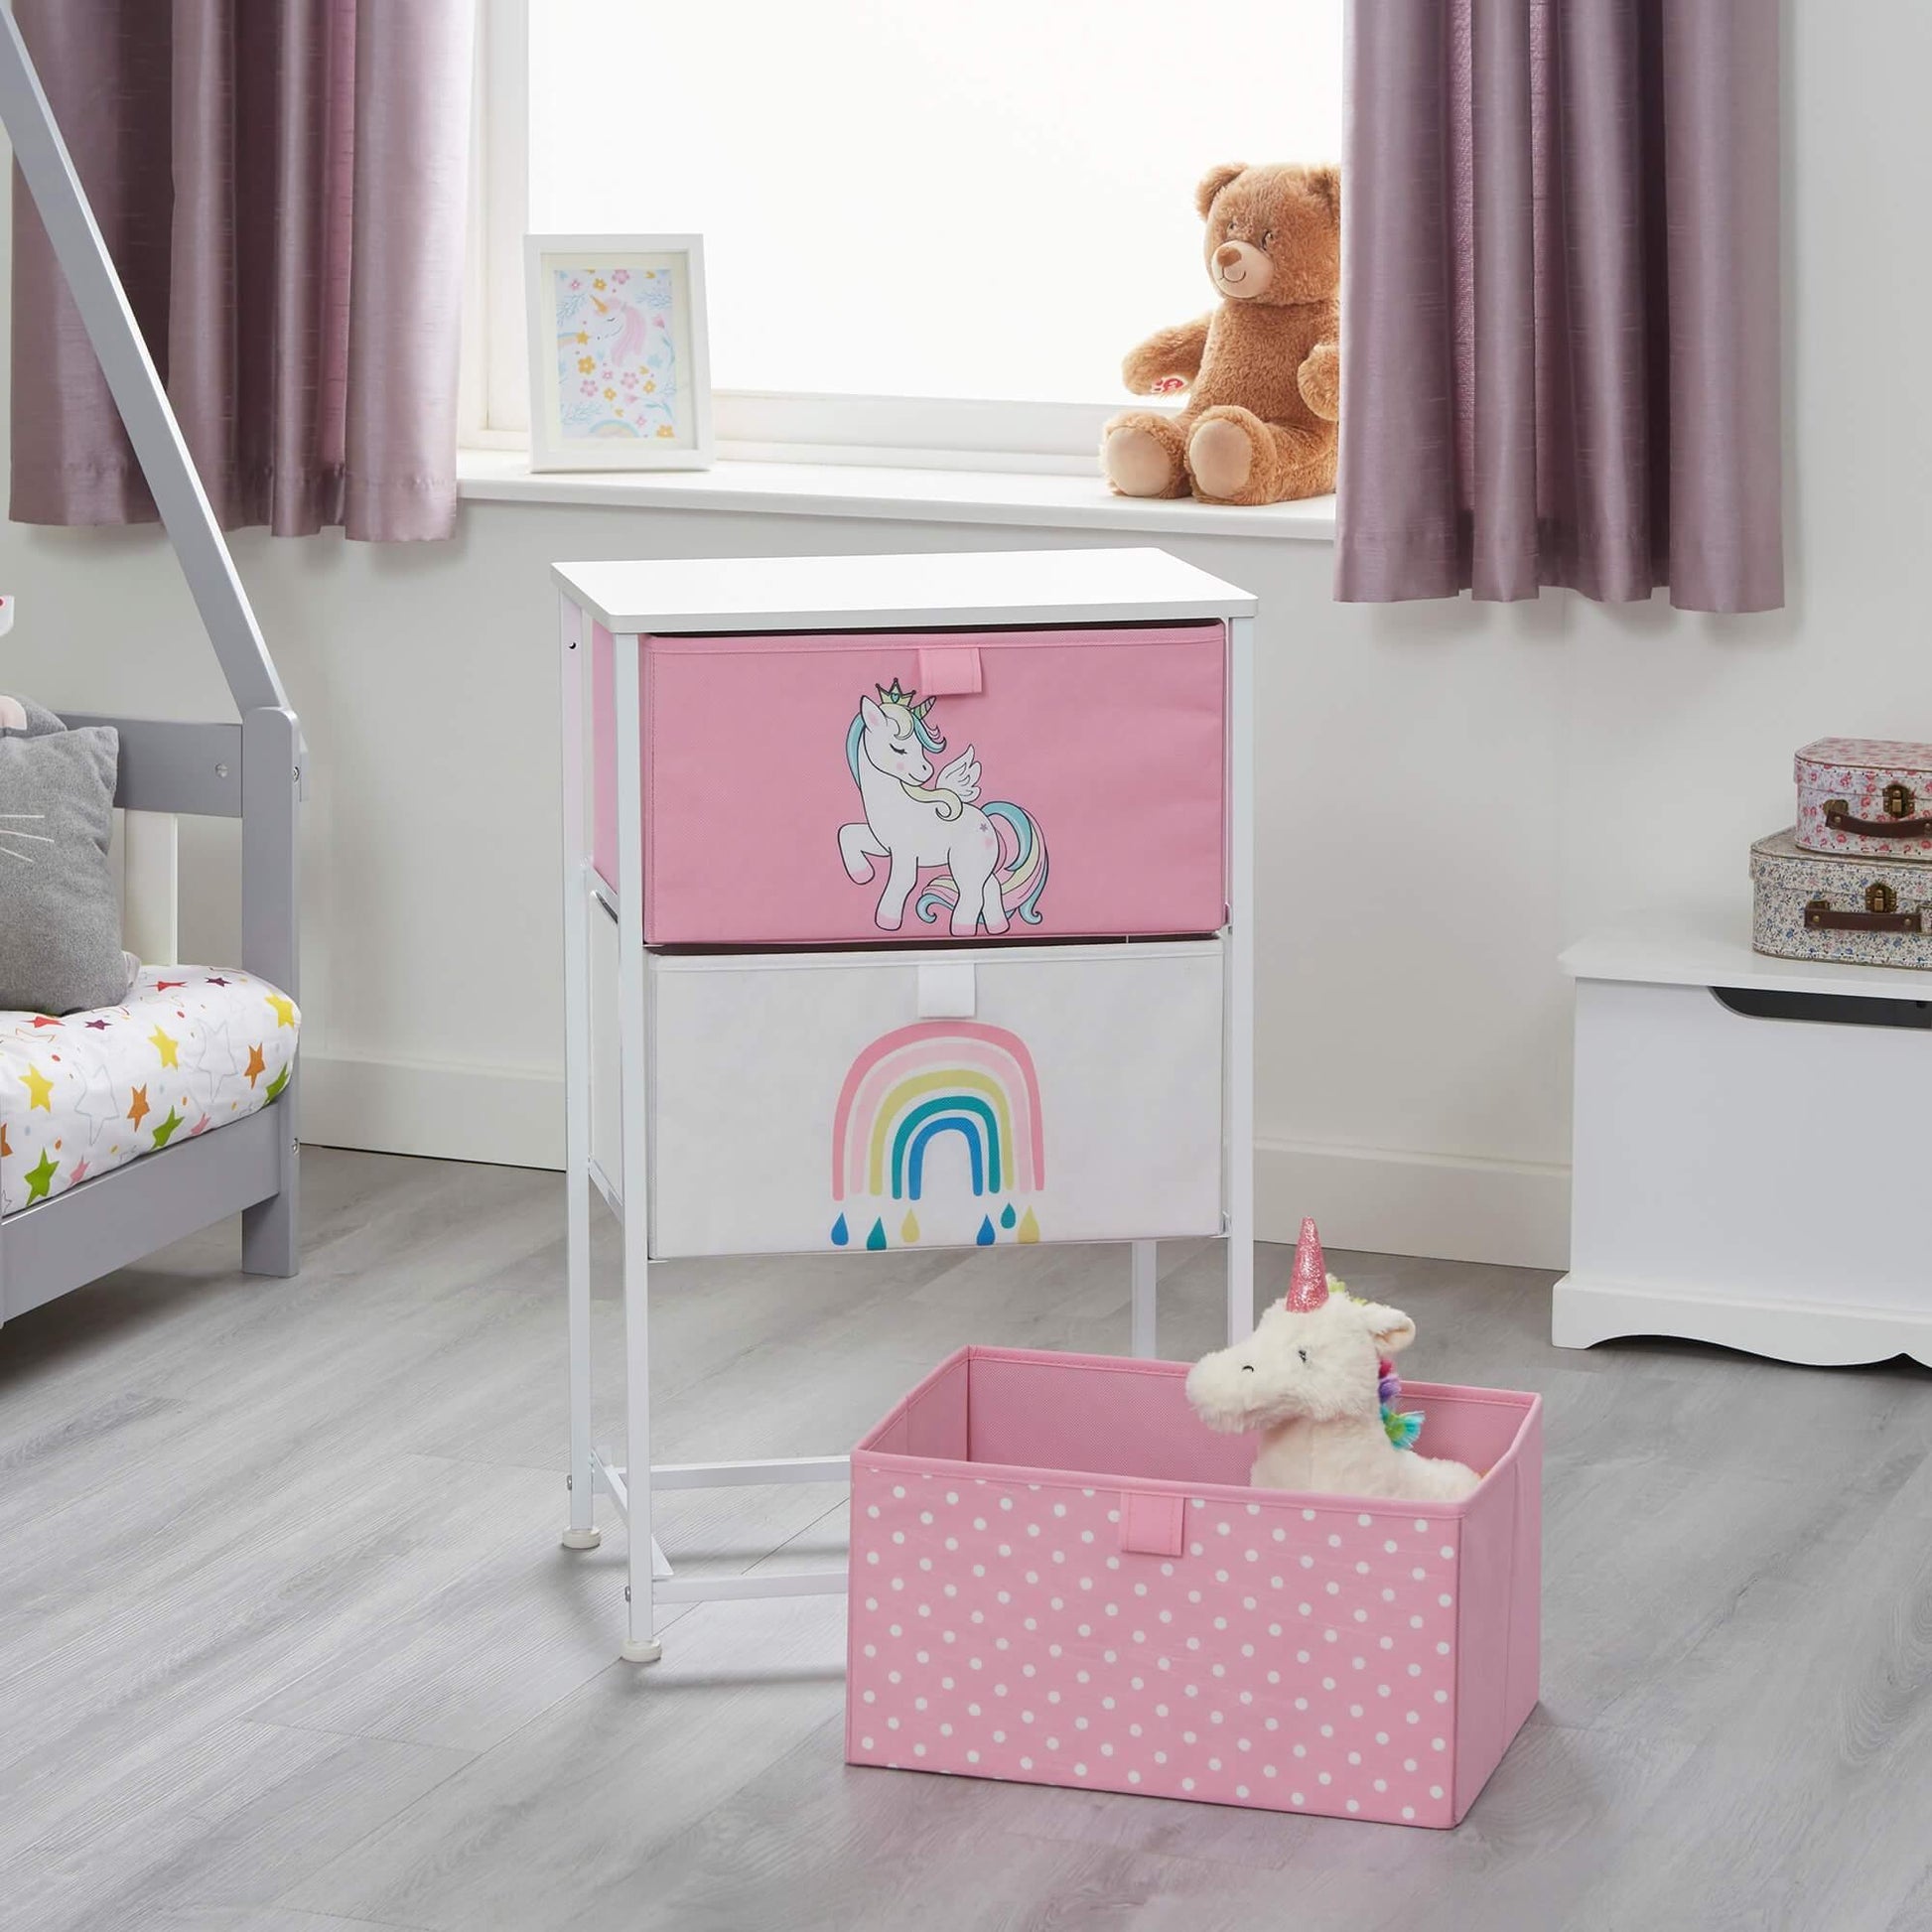 Unicorn Rainbow 3 Drawer Kids Storage Bedside Table - Pink White - Home Inspired Gifts